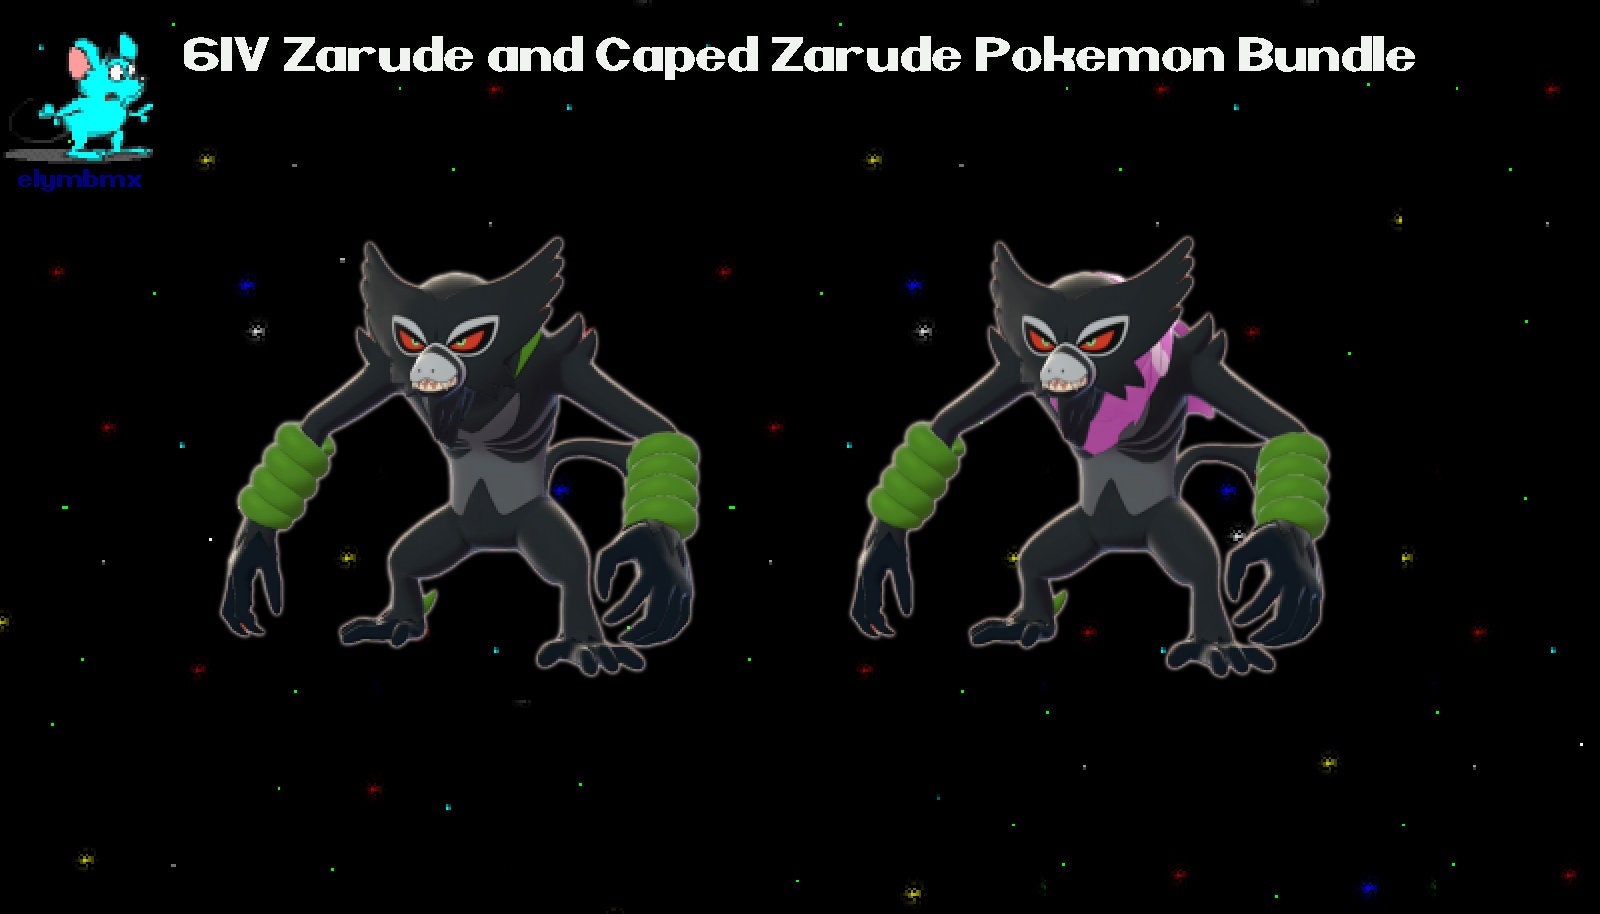 ZARUDE Dada Scarf Form 6IV EVENT Mythical // Pokemon Sword and -  Norway